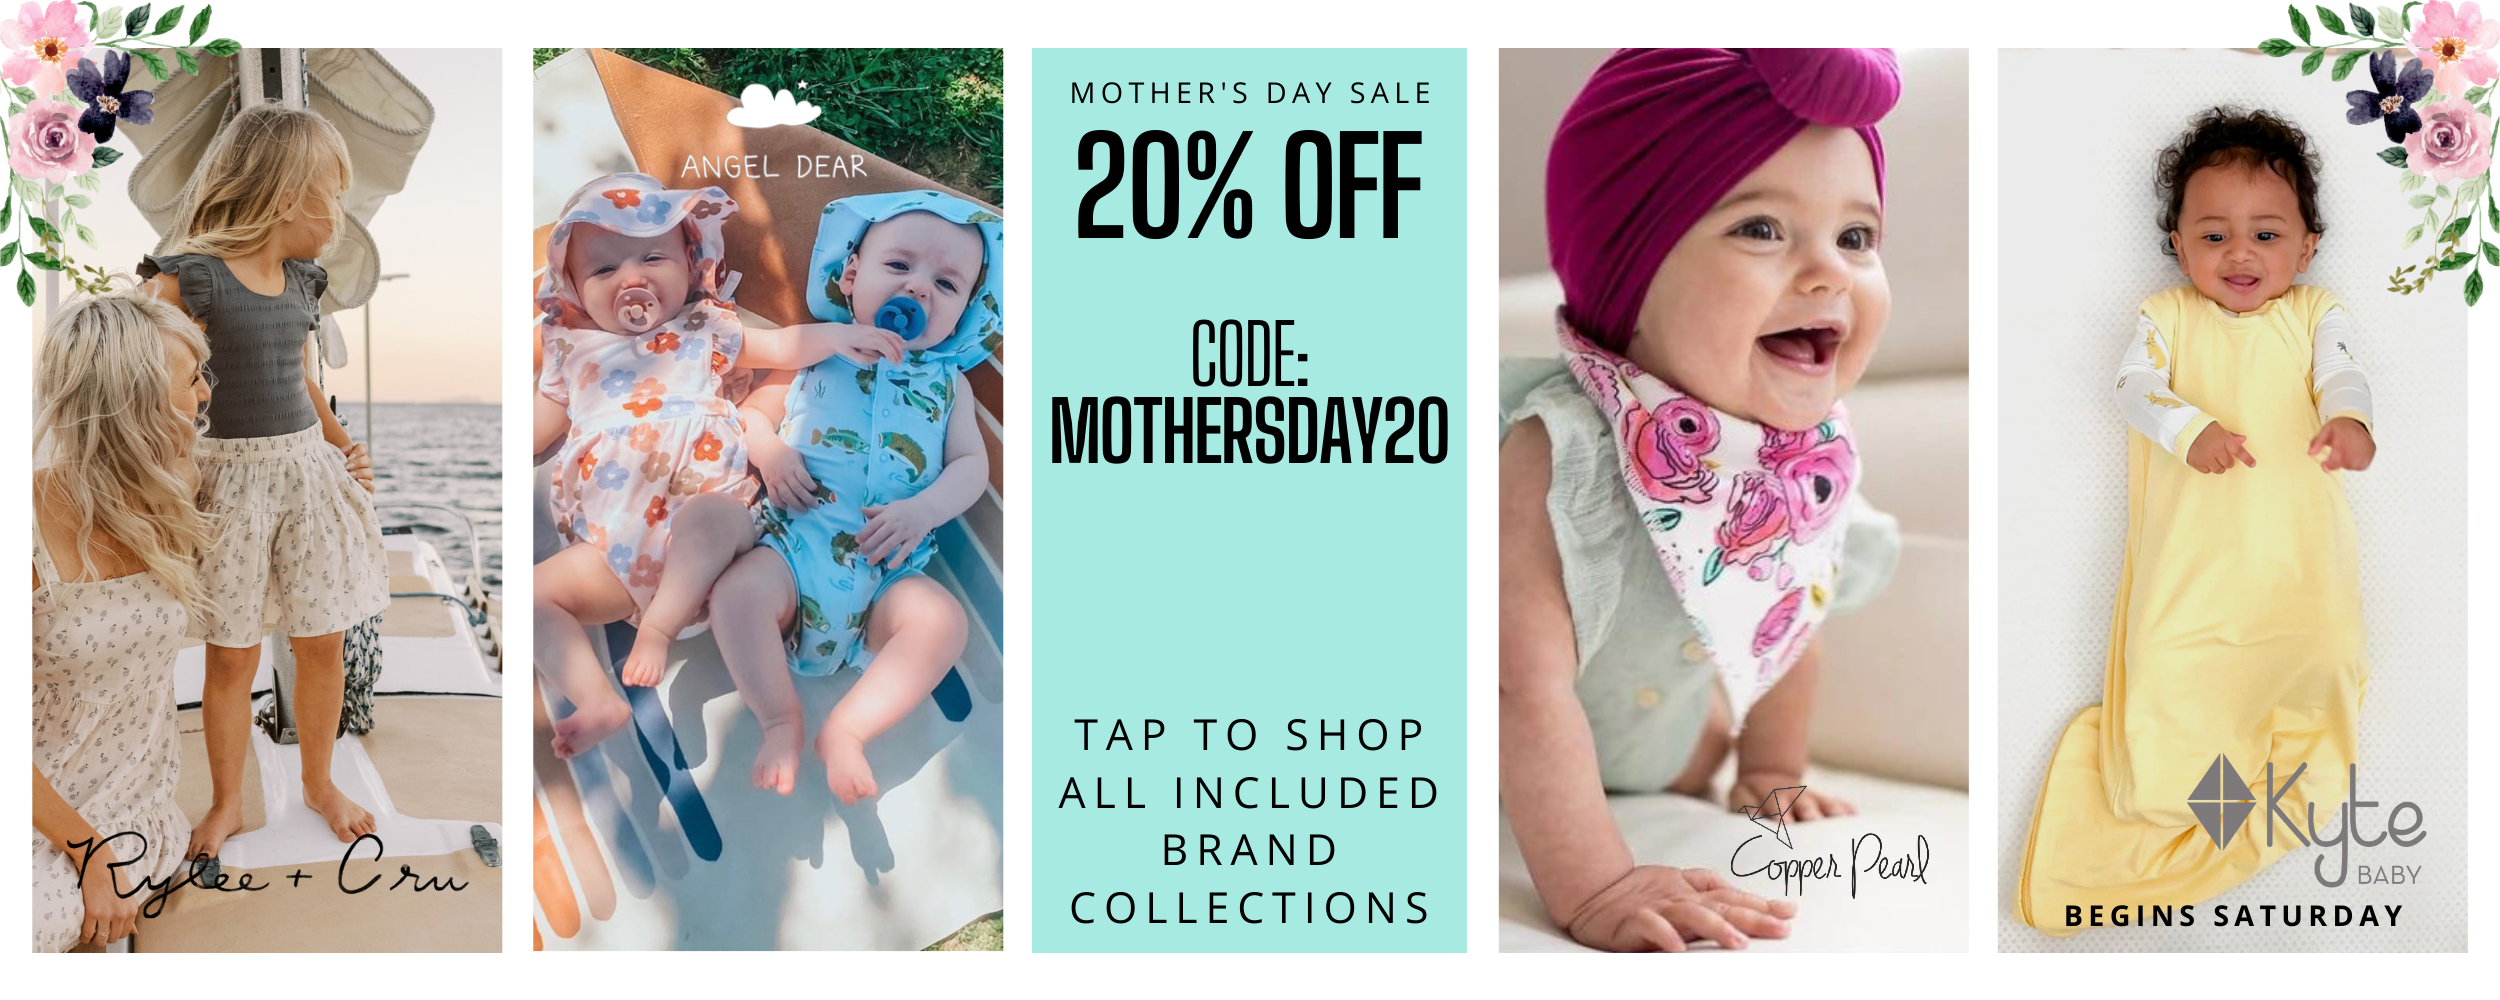 20% off mother's day sale